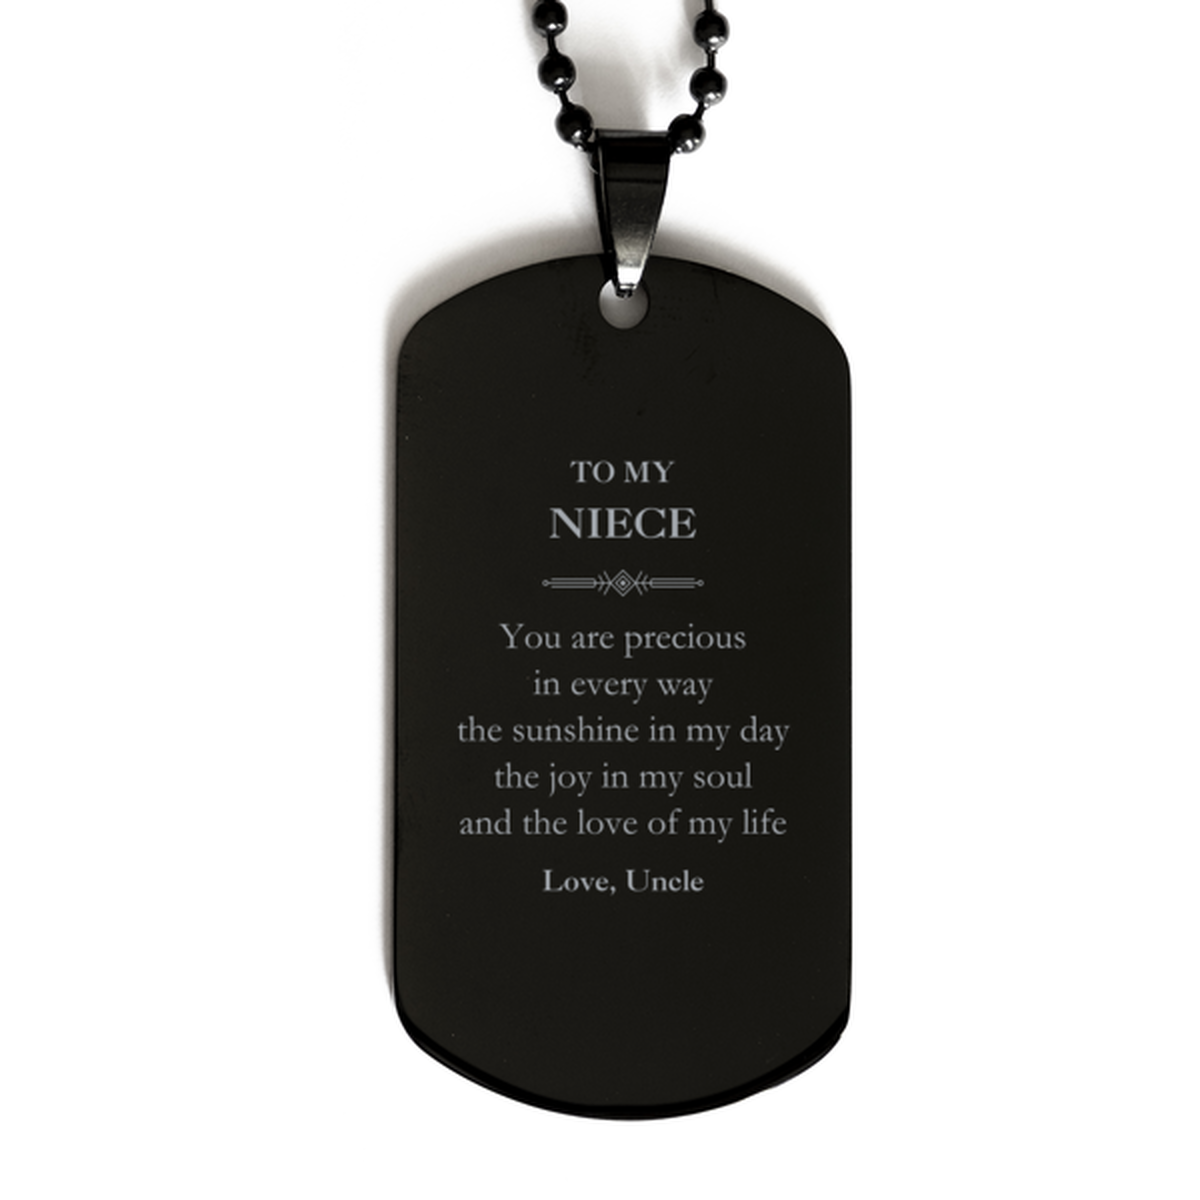 Graduation Gifts for Niece Black Dog Tag Present from Uncle, Christmas Niece Birthday Gifts Niece You are precious in every way the sunshine in my day. Love, Uncle